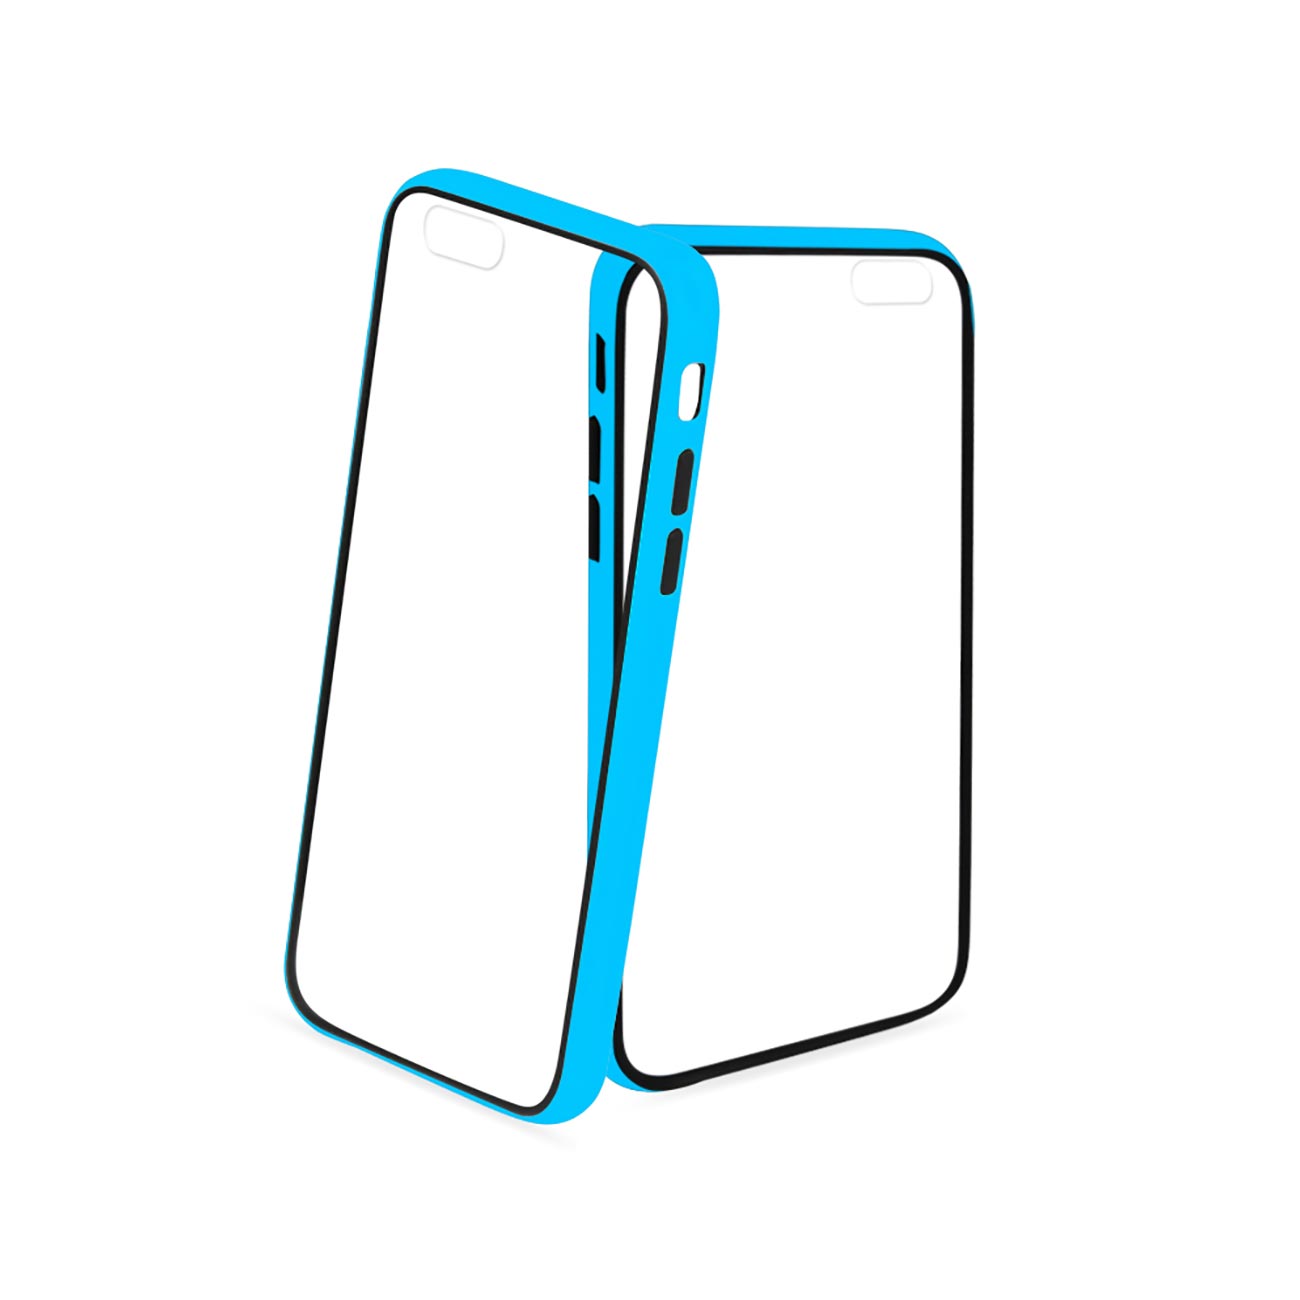 iPhone 6 Bumper Case With Tempered Glass Screen Protector In Blue